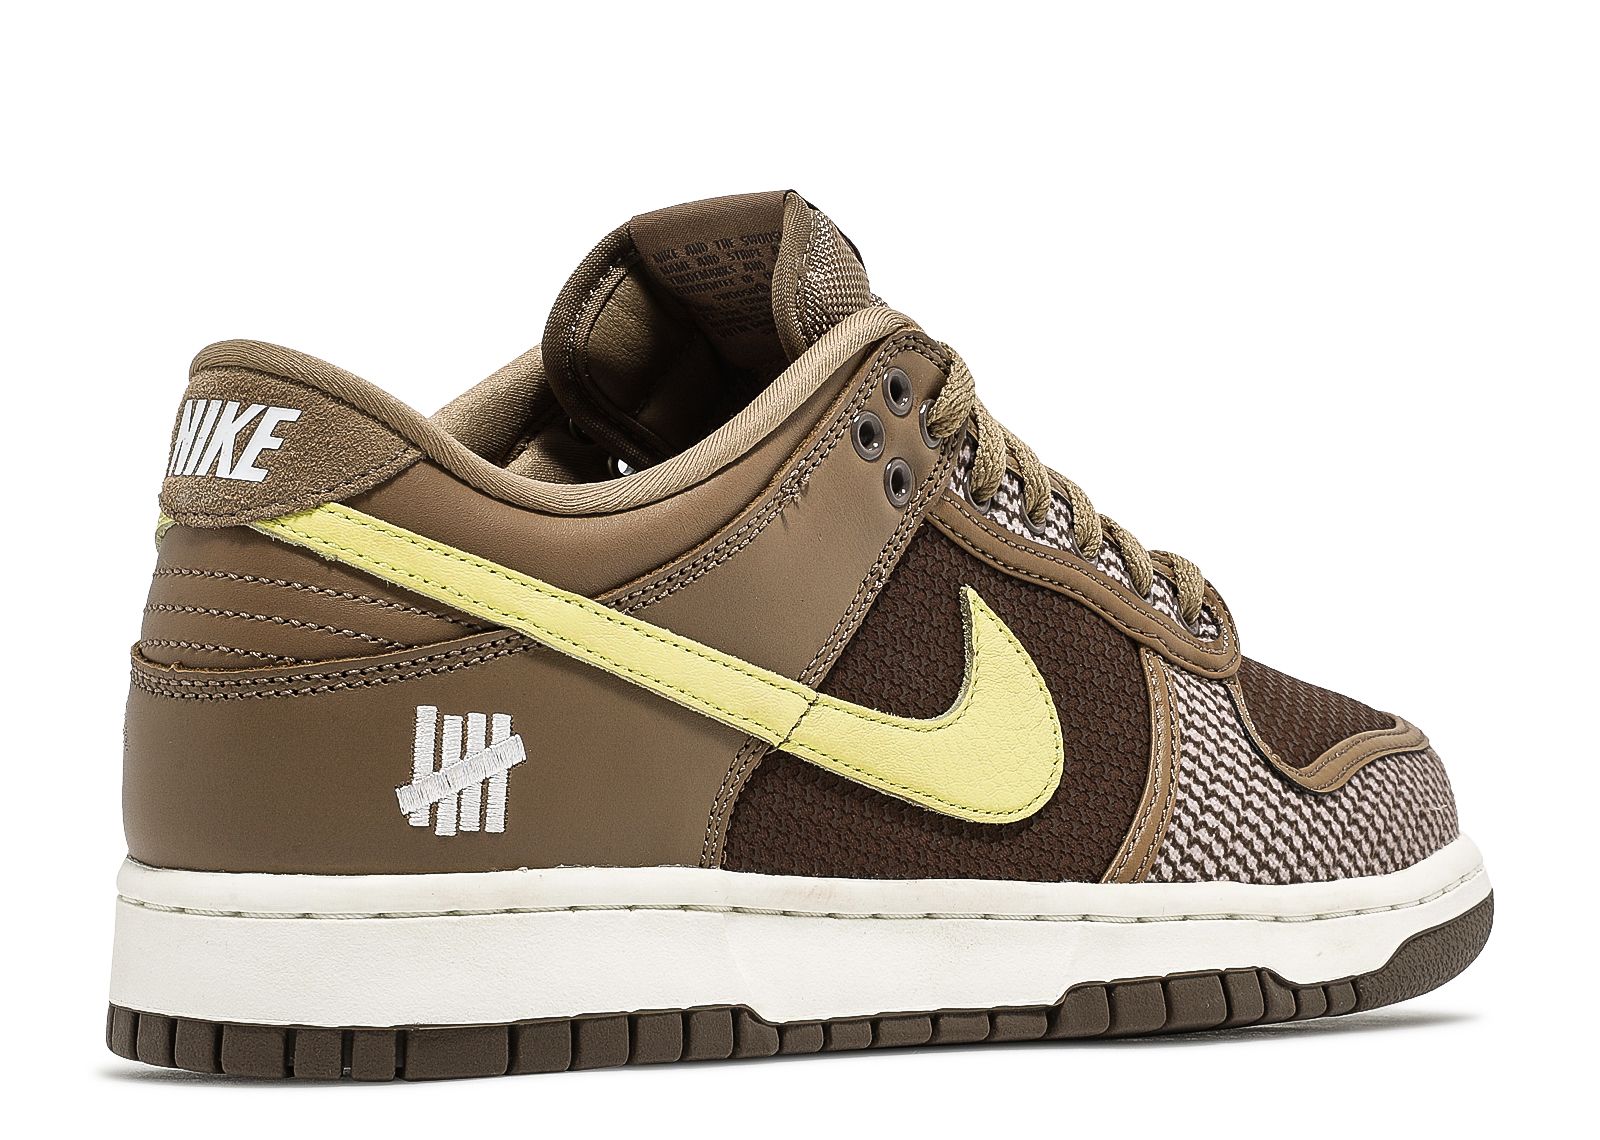 Undefeated X Dunk Low SP 'Canteen' - Nike - DH3061 200 - canteen 